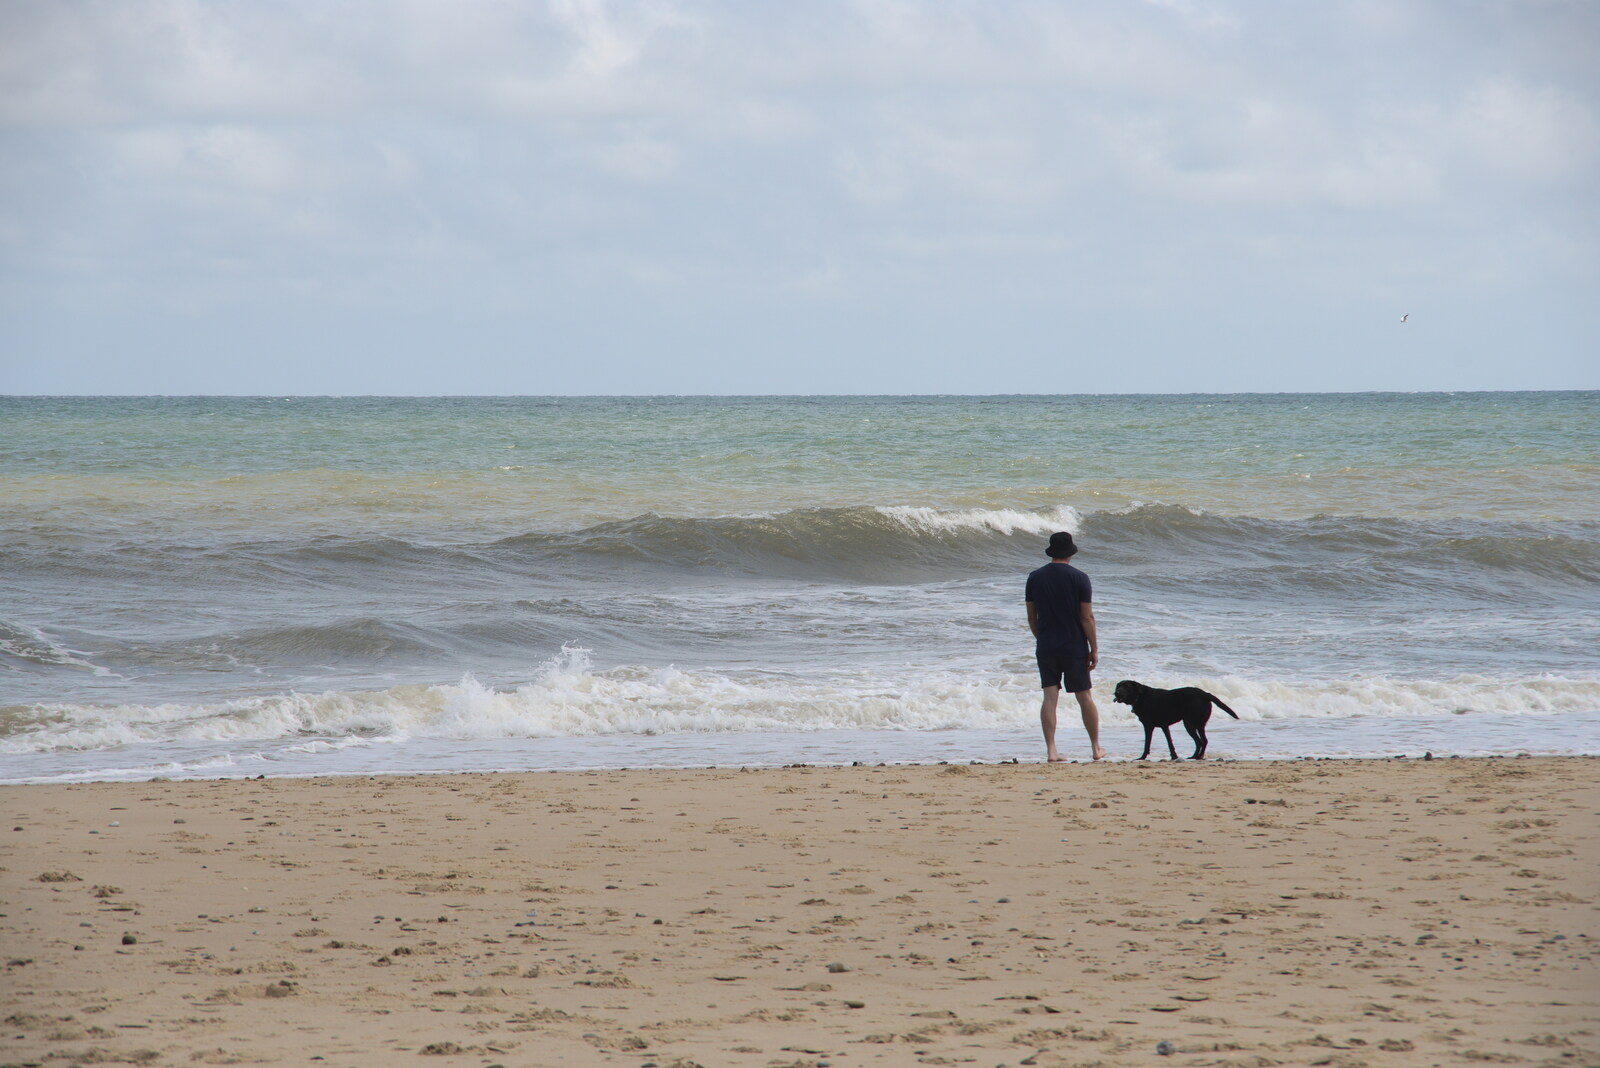 Andrew and Tilly Dog on the beach from Camping in the Dunes, Waxham Sands, Norfolk - 9th July 2022